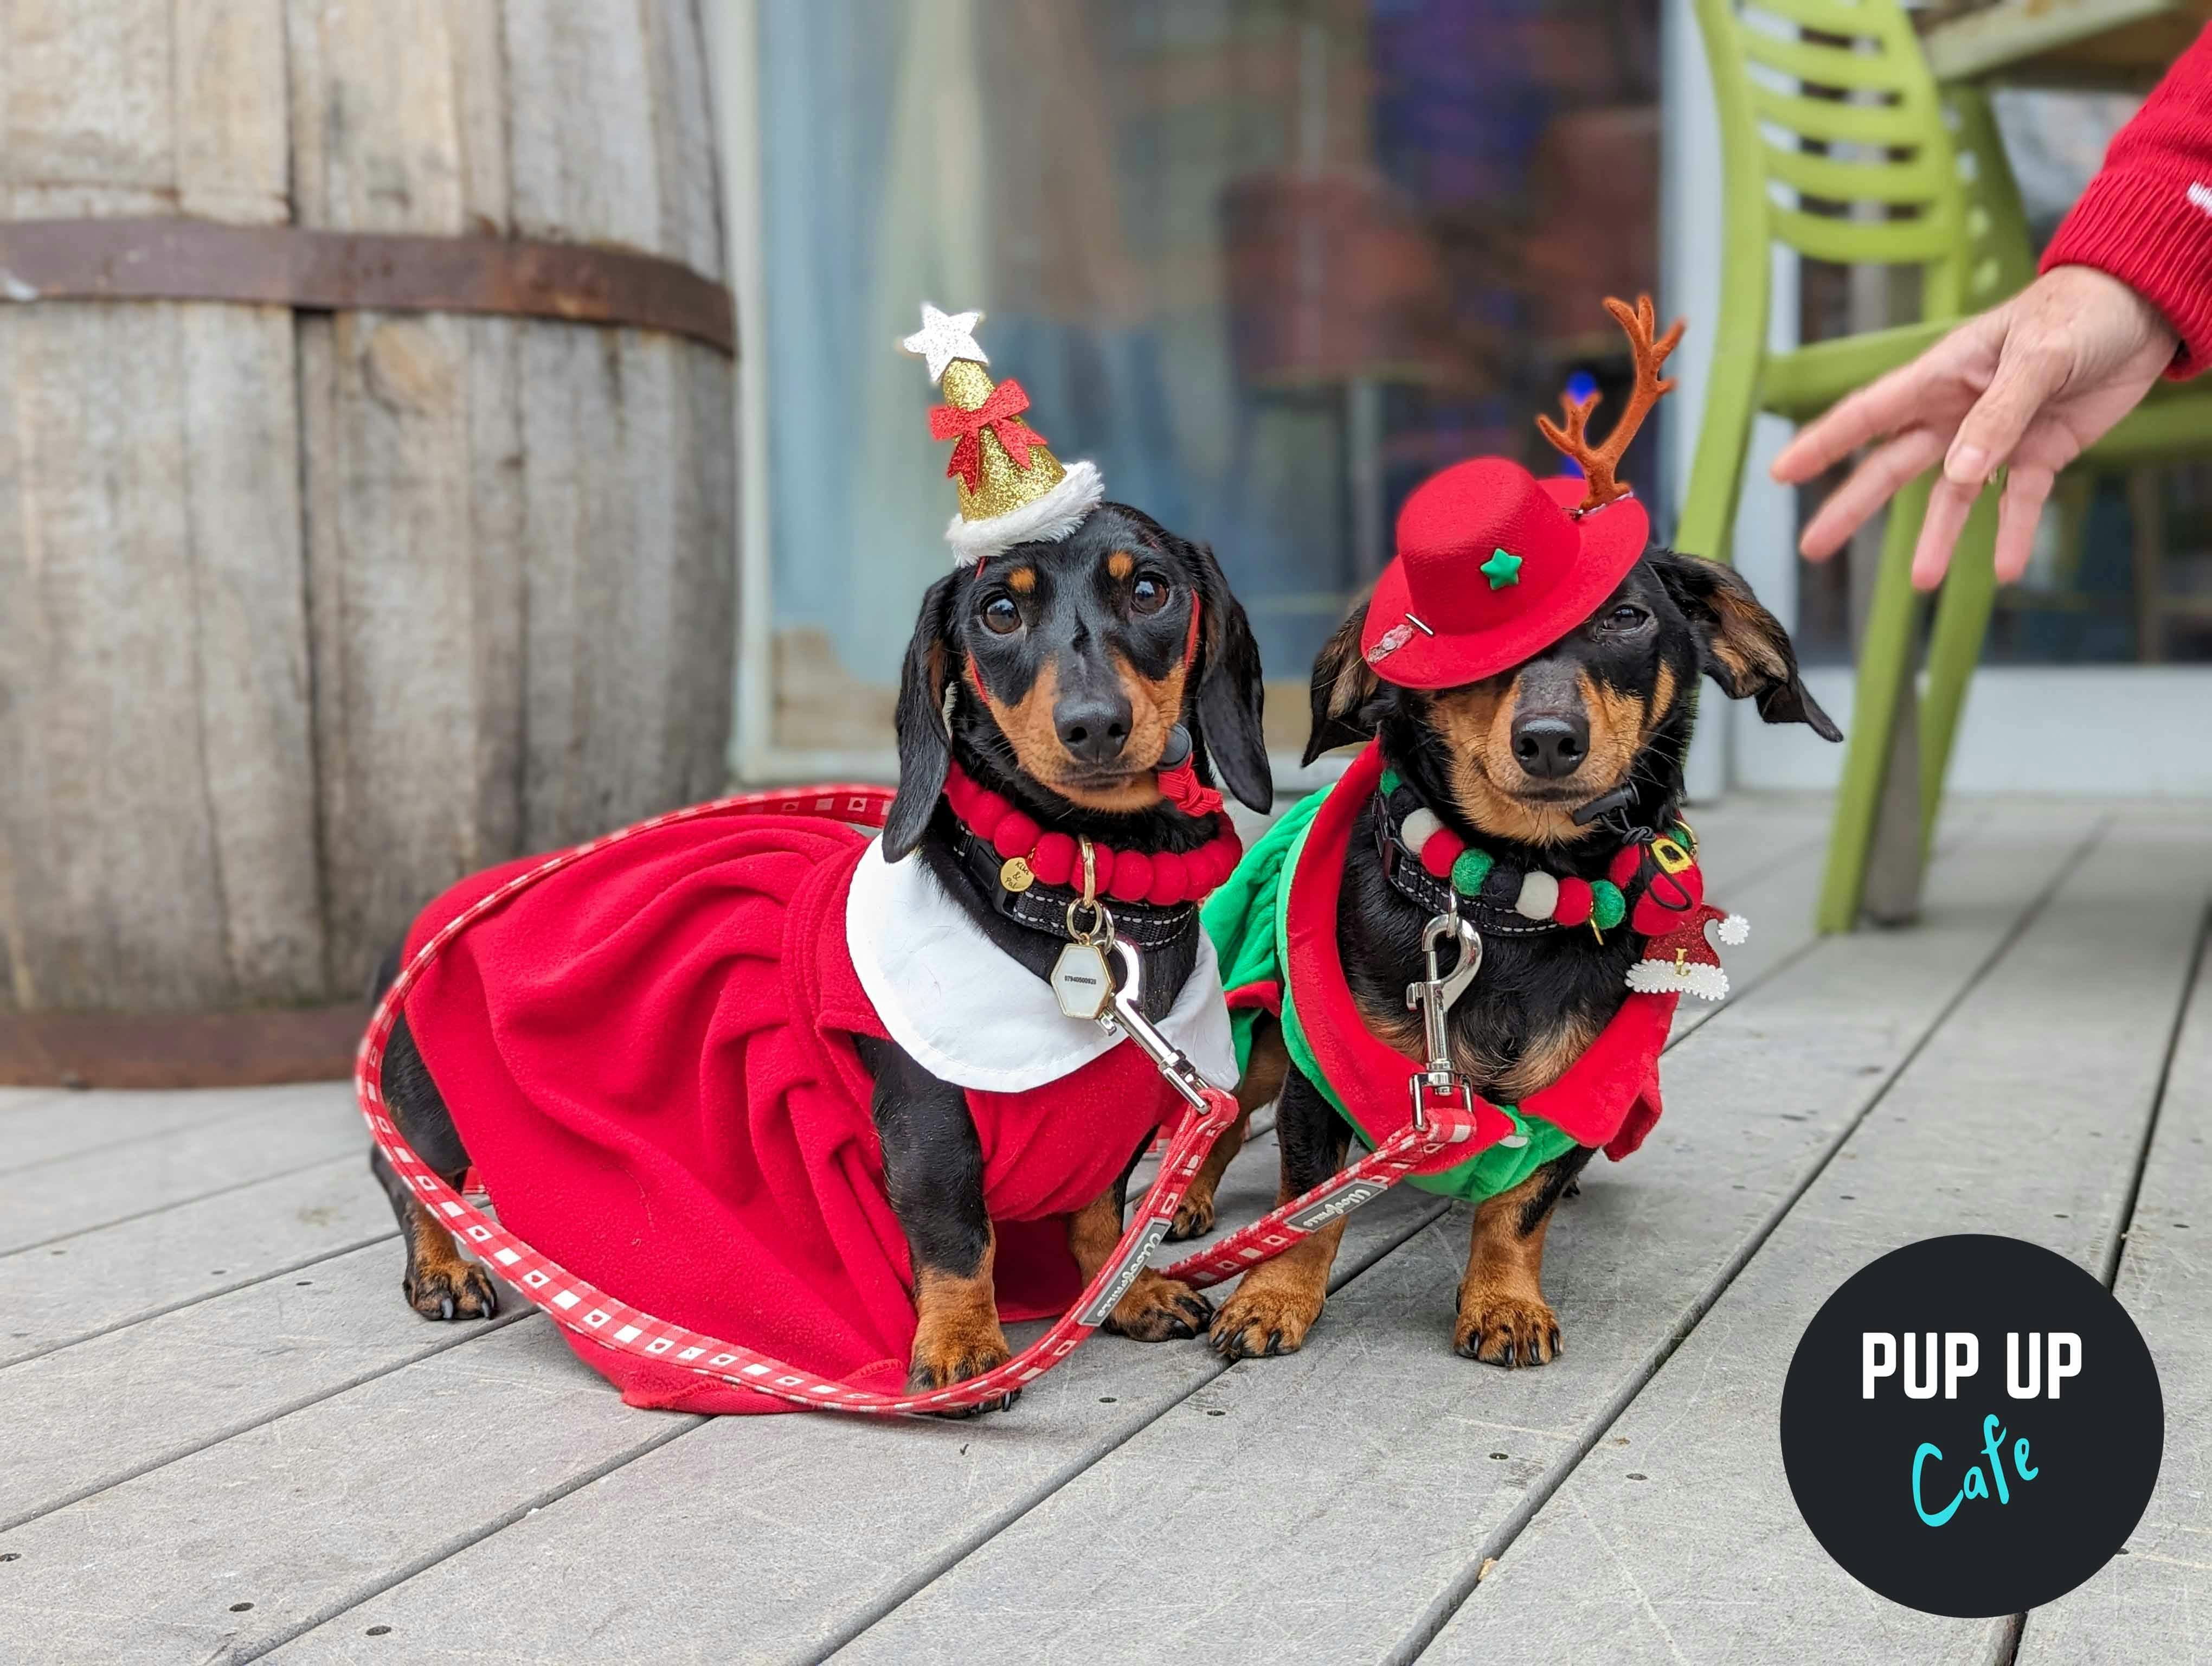 The Pup Up Café is back with its Christmas extravaganza